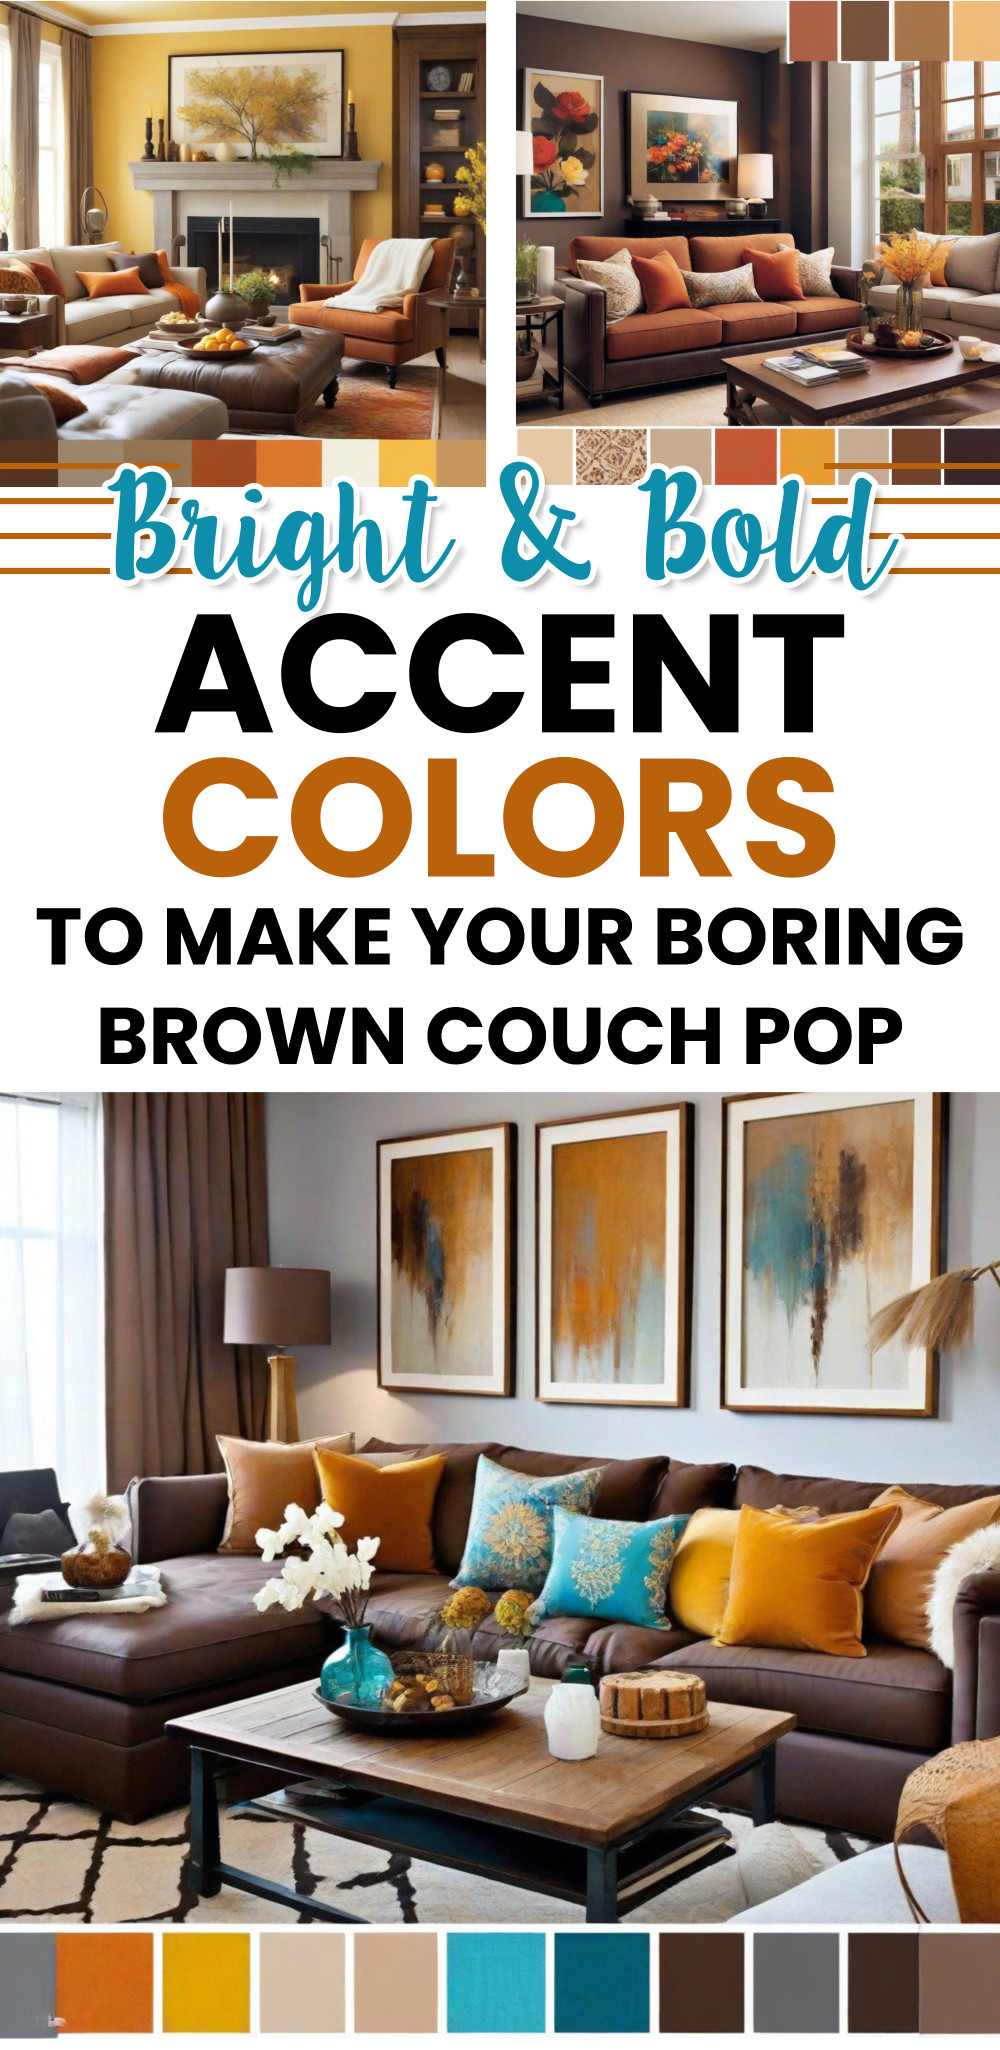 bright and bold accent colors for boring brown couch